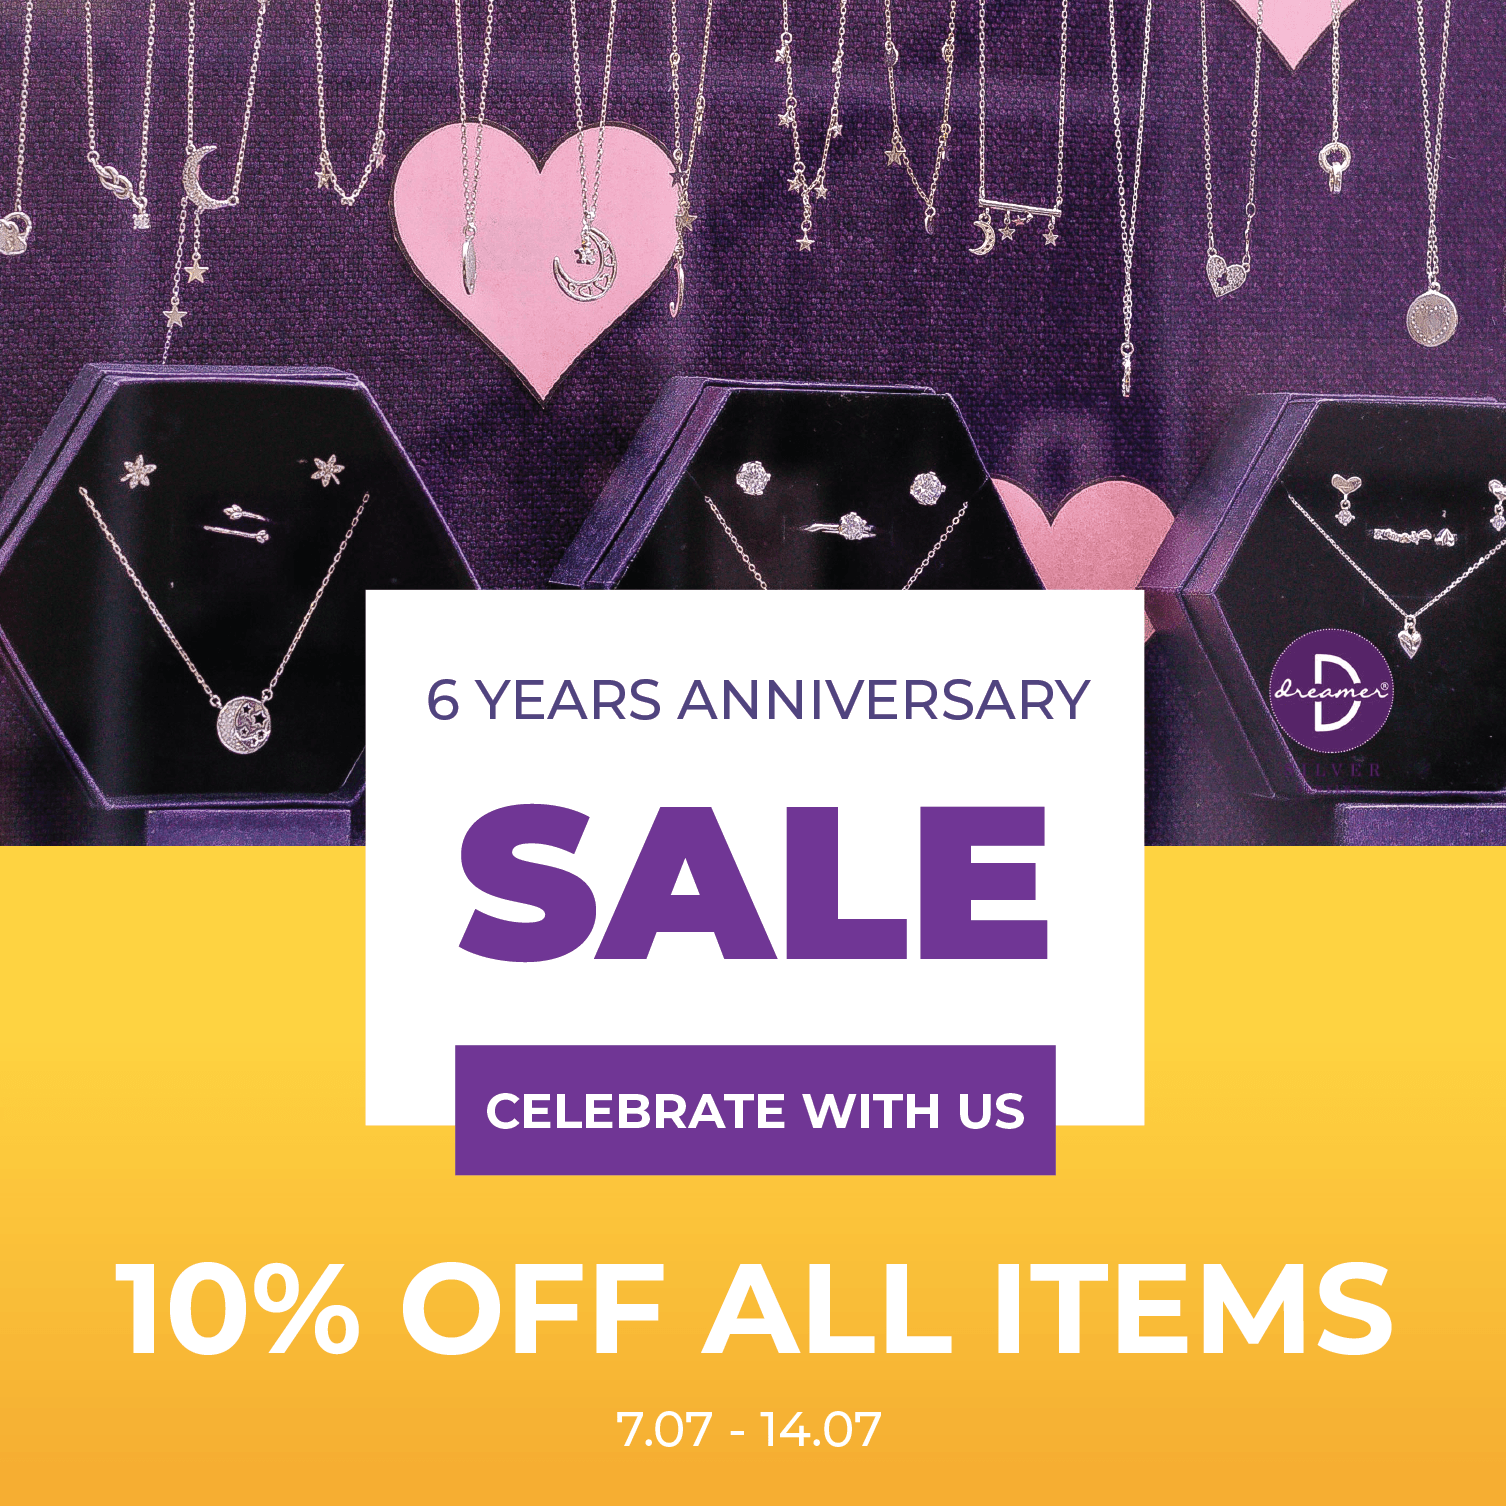 DDREAMER JEWELRY - HAPPY 6 YEARS ANNIVERSARY PROMOTION